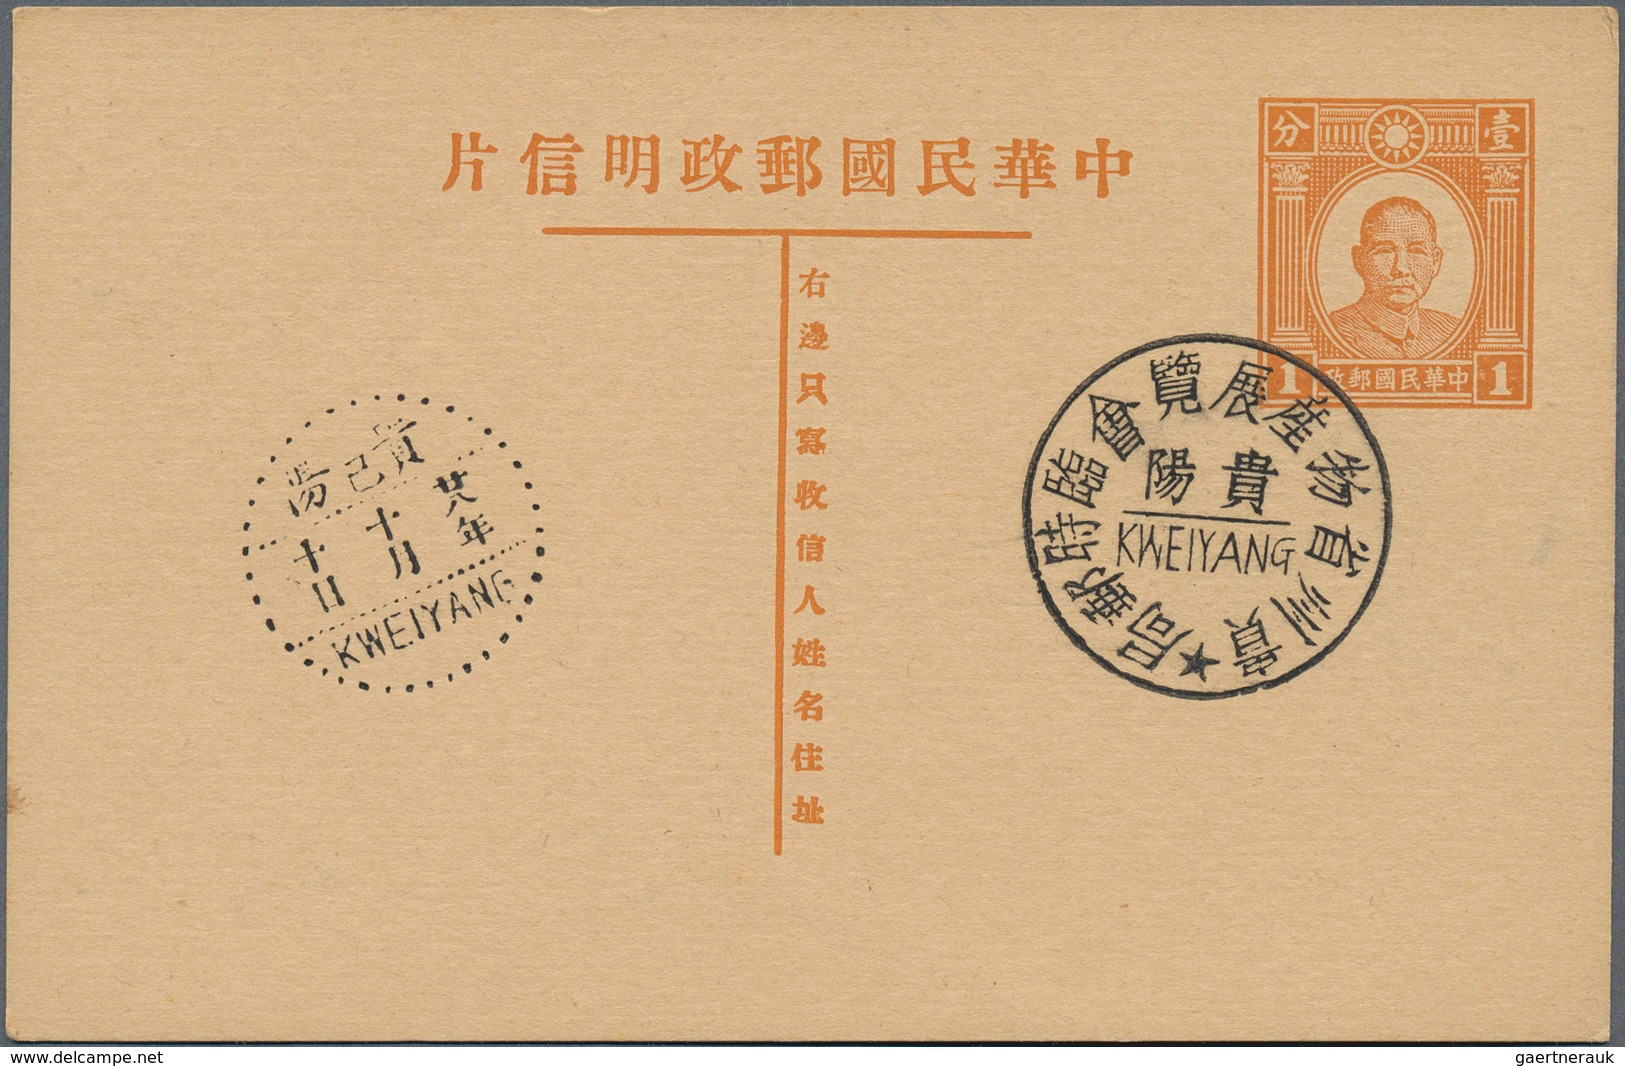 22399 China: 1923/38, covers (4 inc. 1/2 S. martyr on Nanking local cover with boxed 1934 commemorative pm